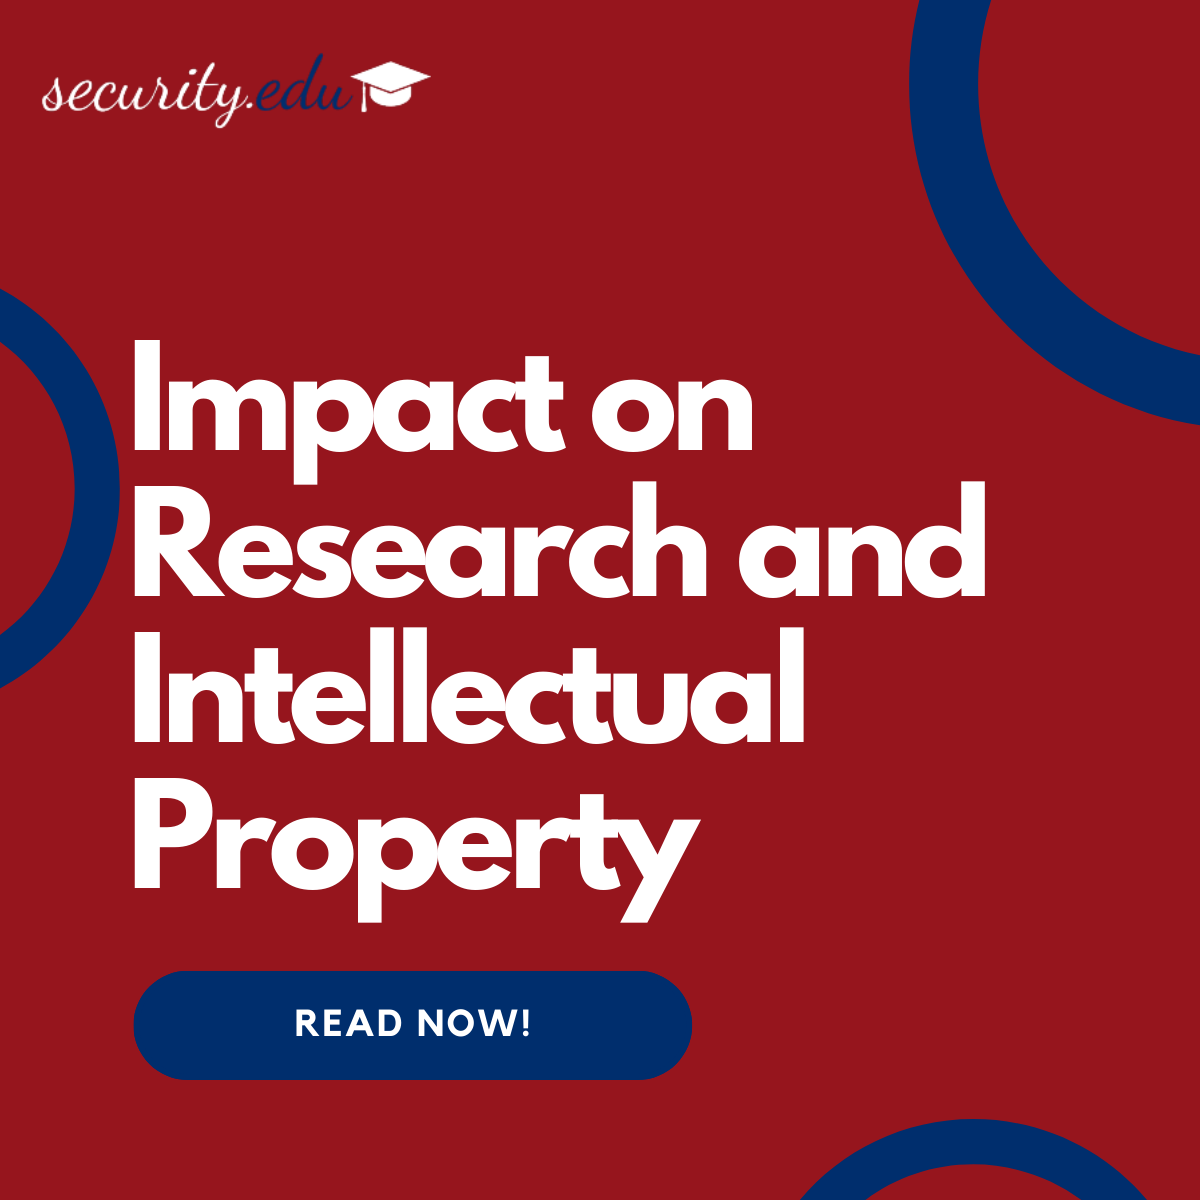 Featured image for “Impact on Research and Intellectual Property”